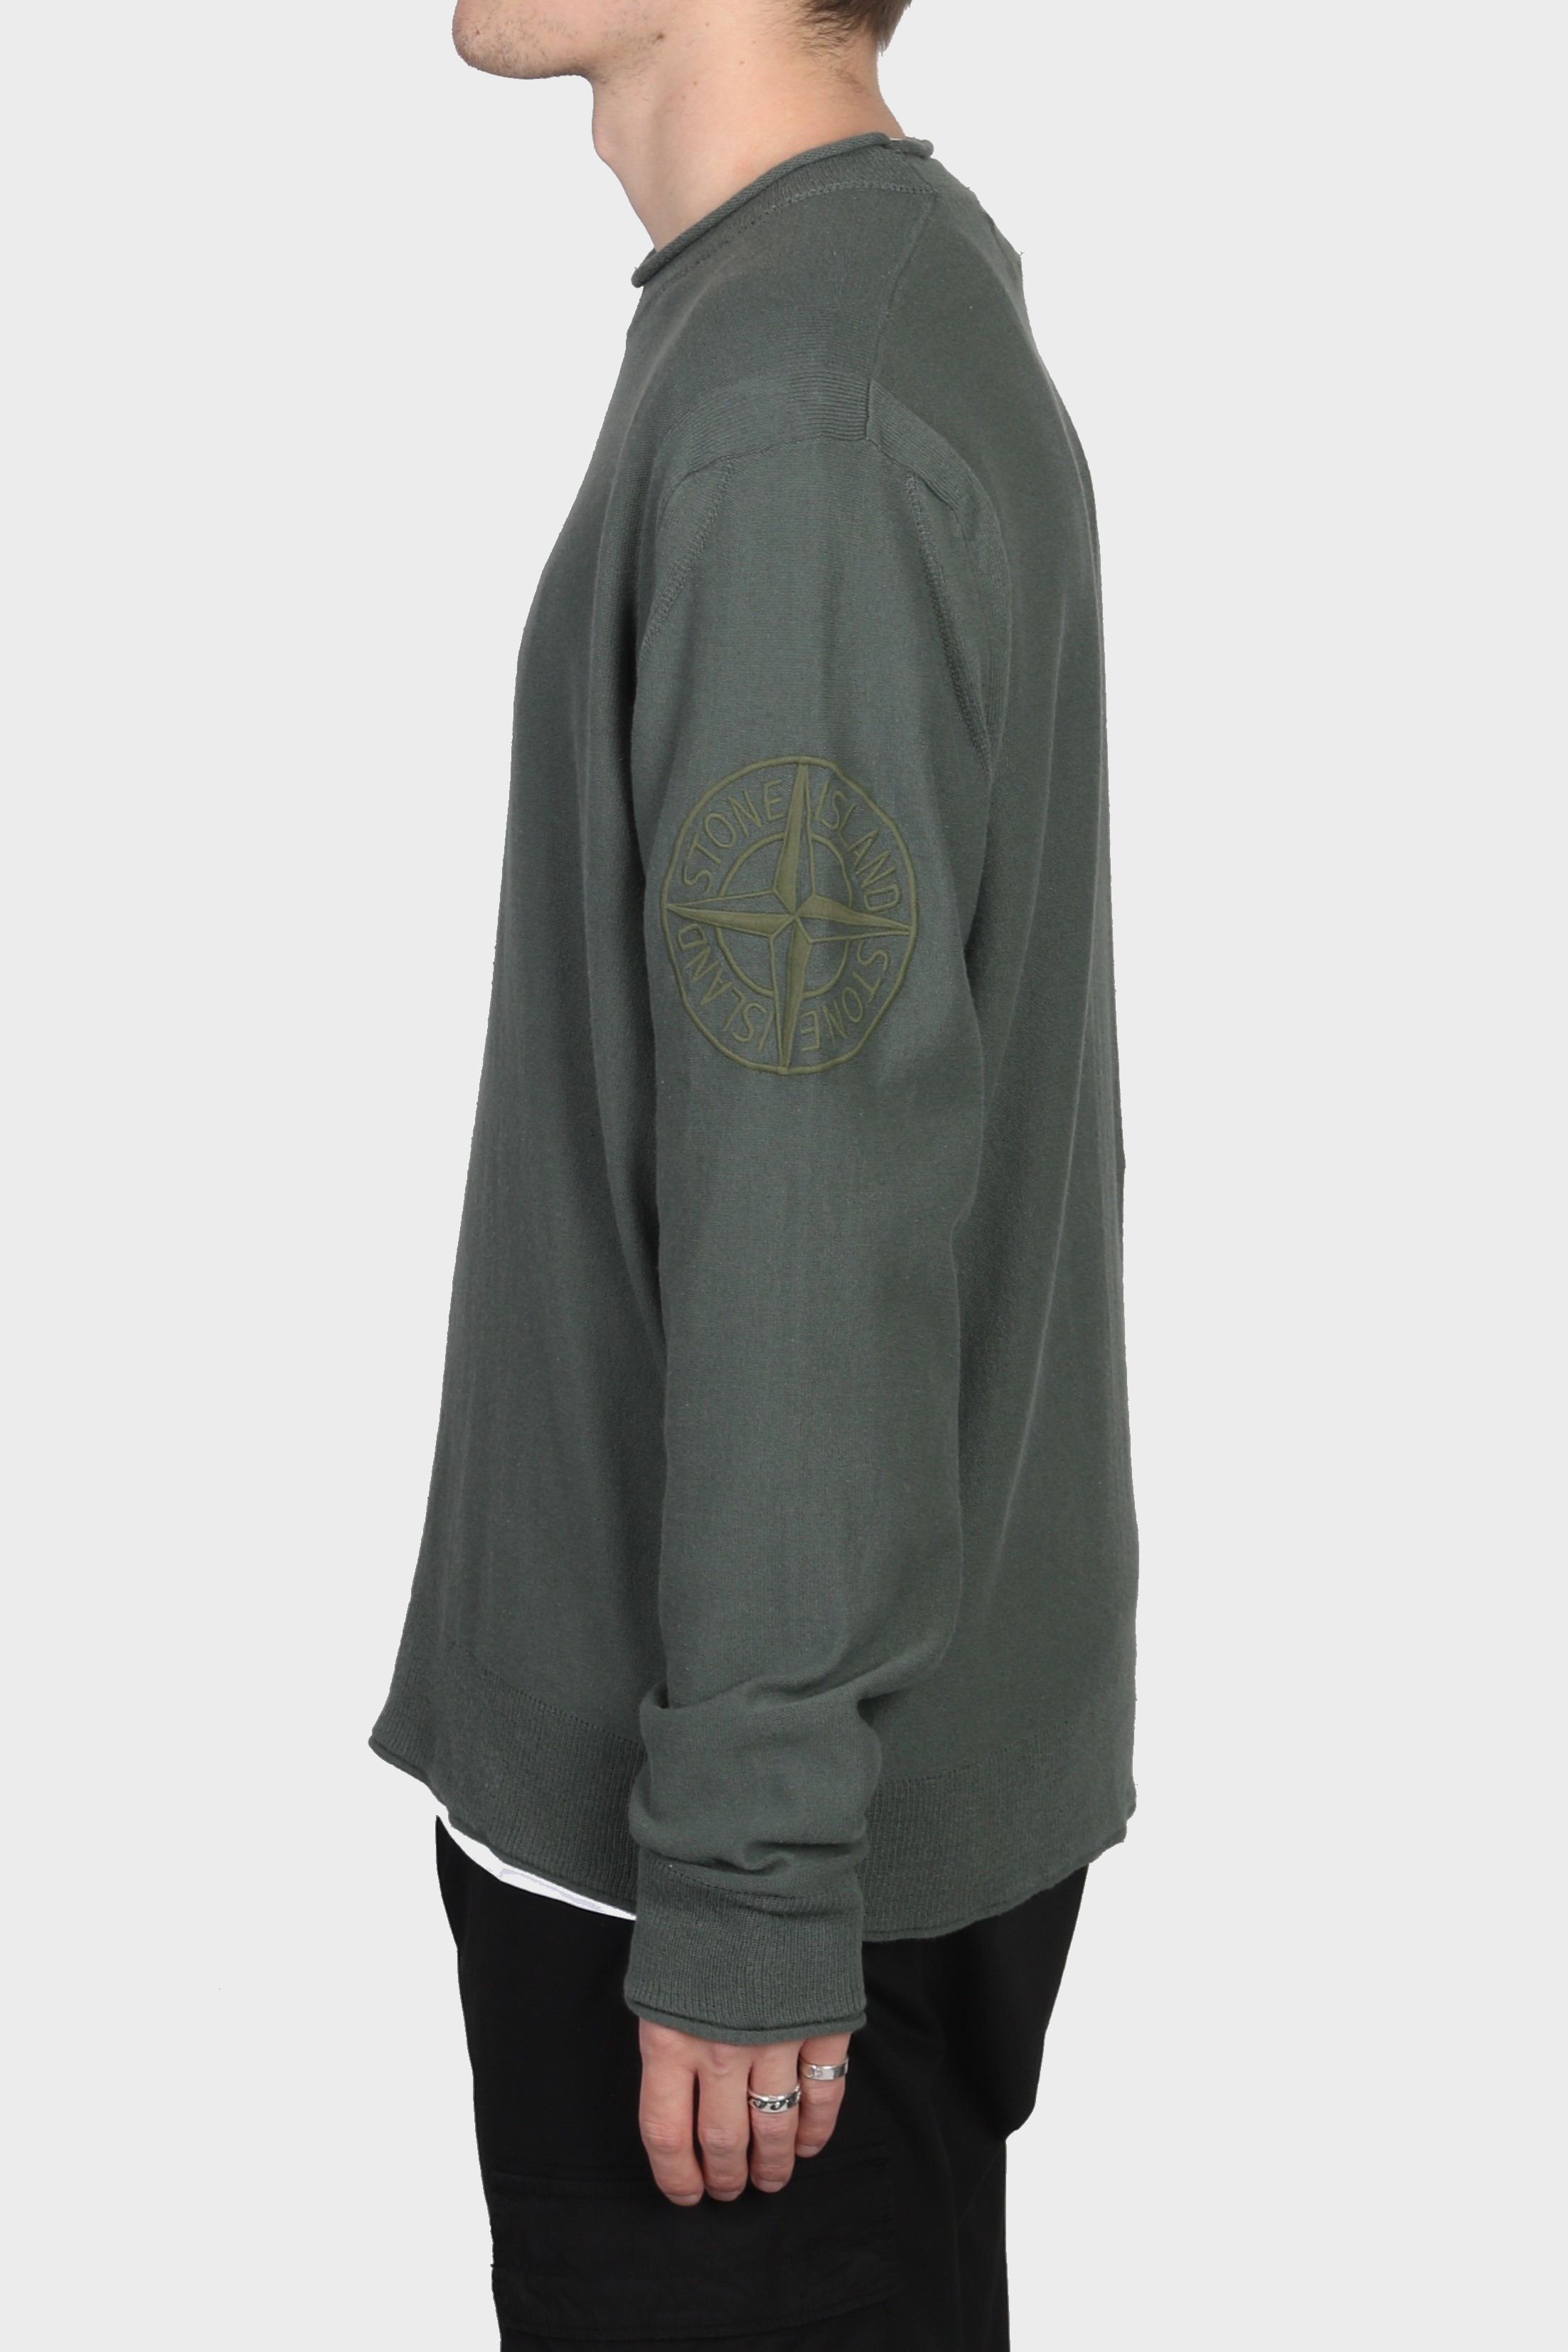 STONE ISLAND Cotton Knit Pullover in Green M